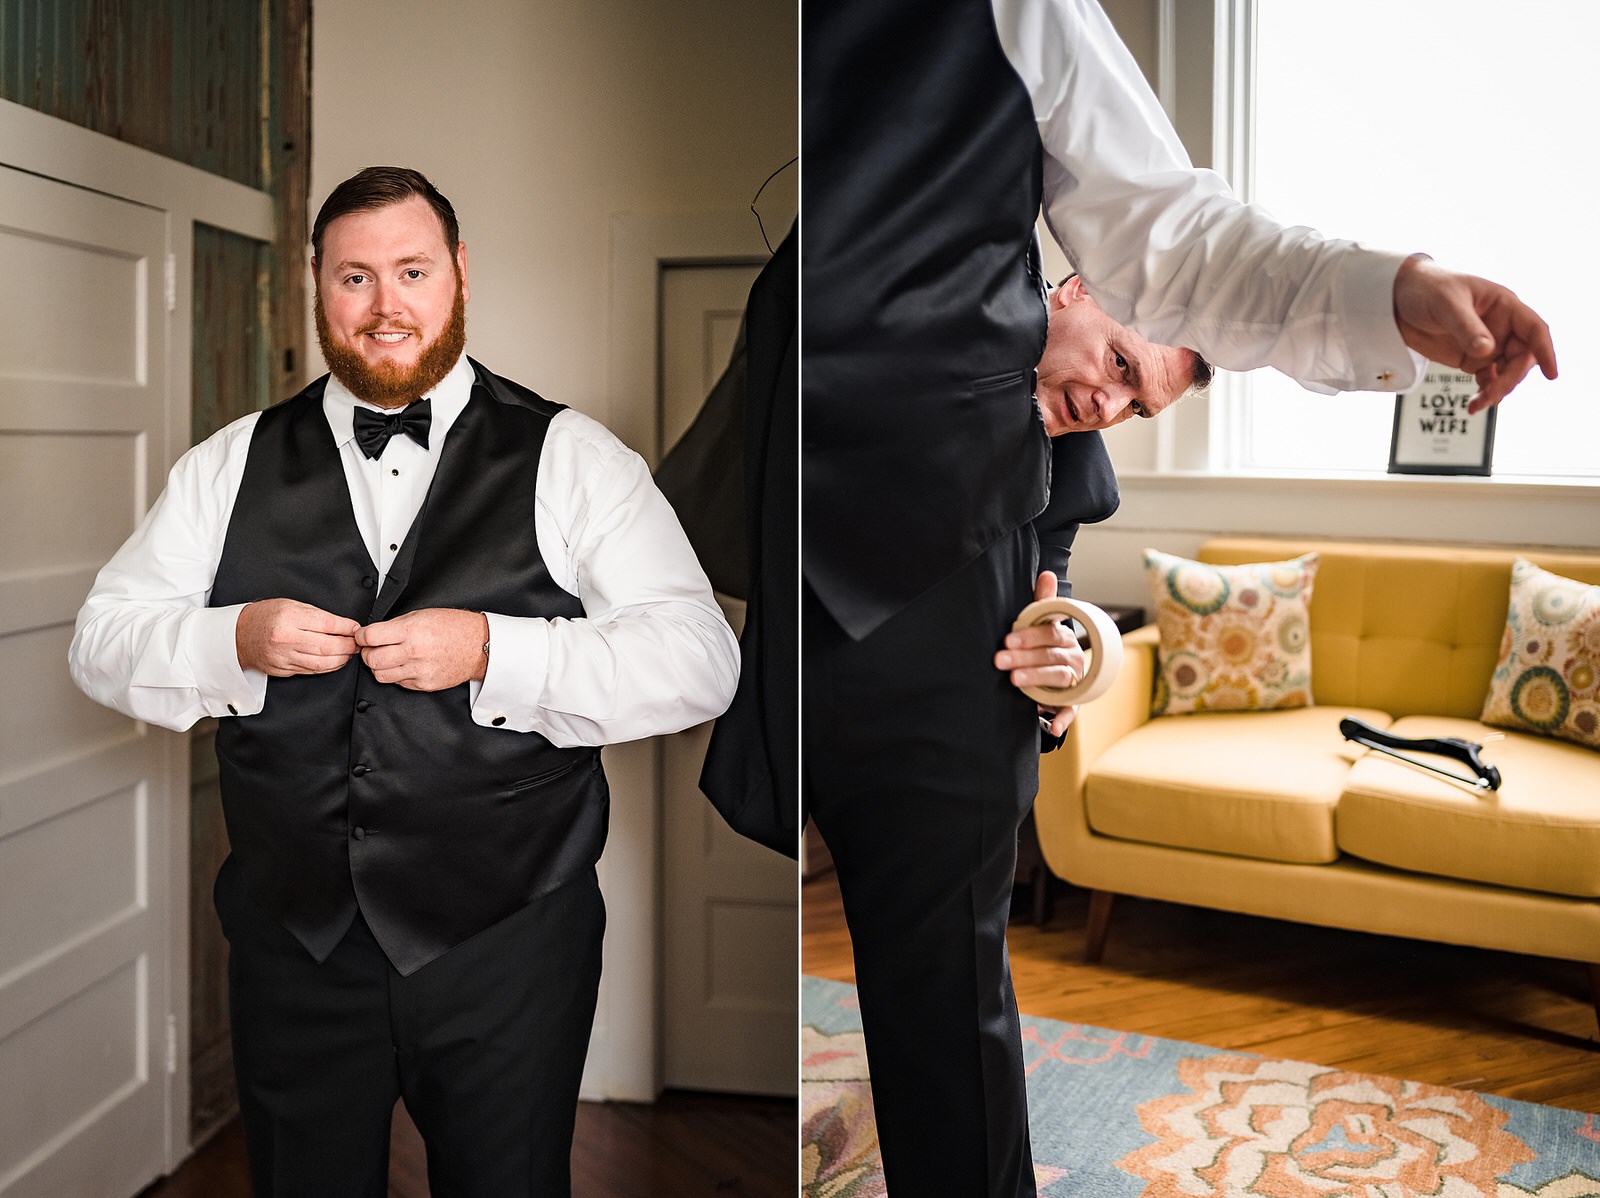 Groom finishes getting ready before the wedding